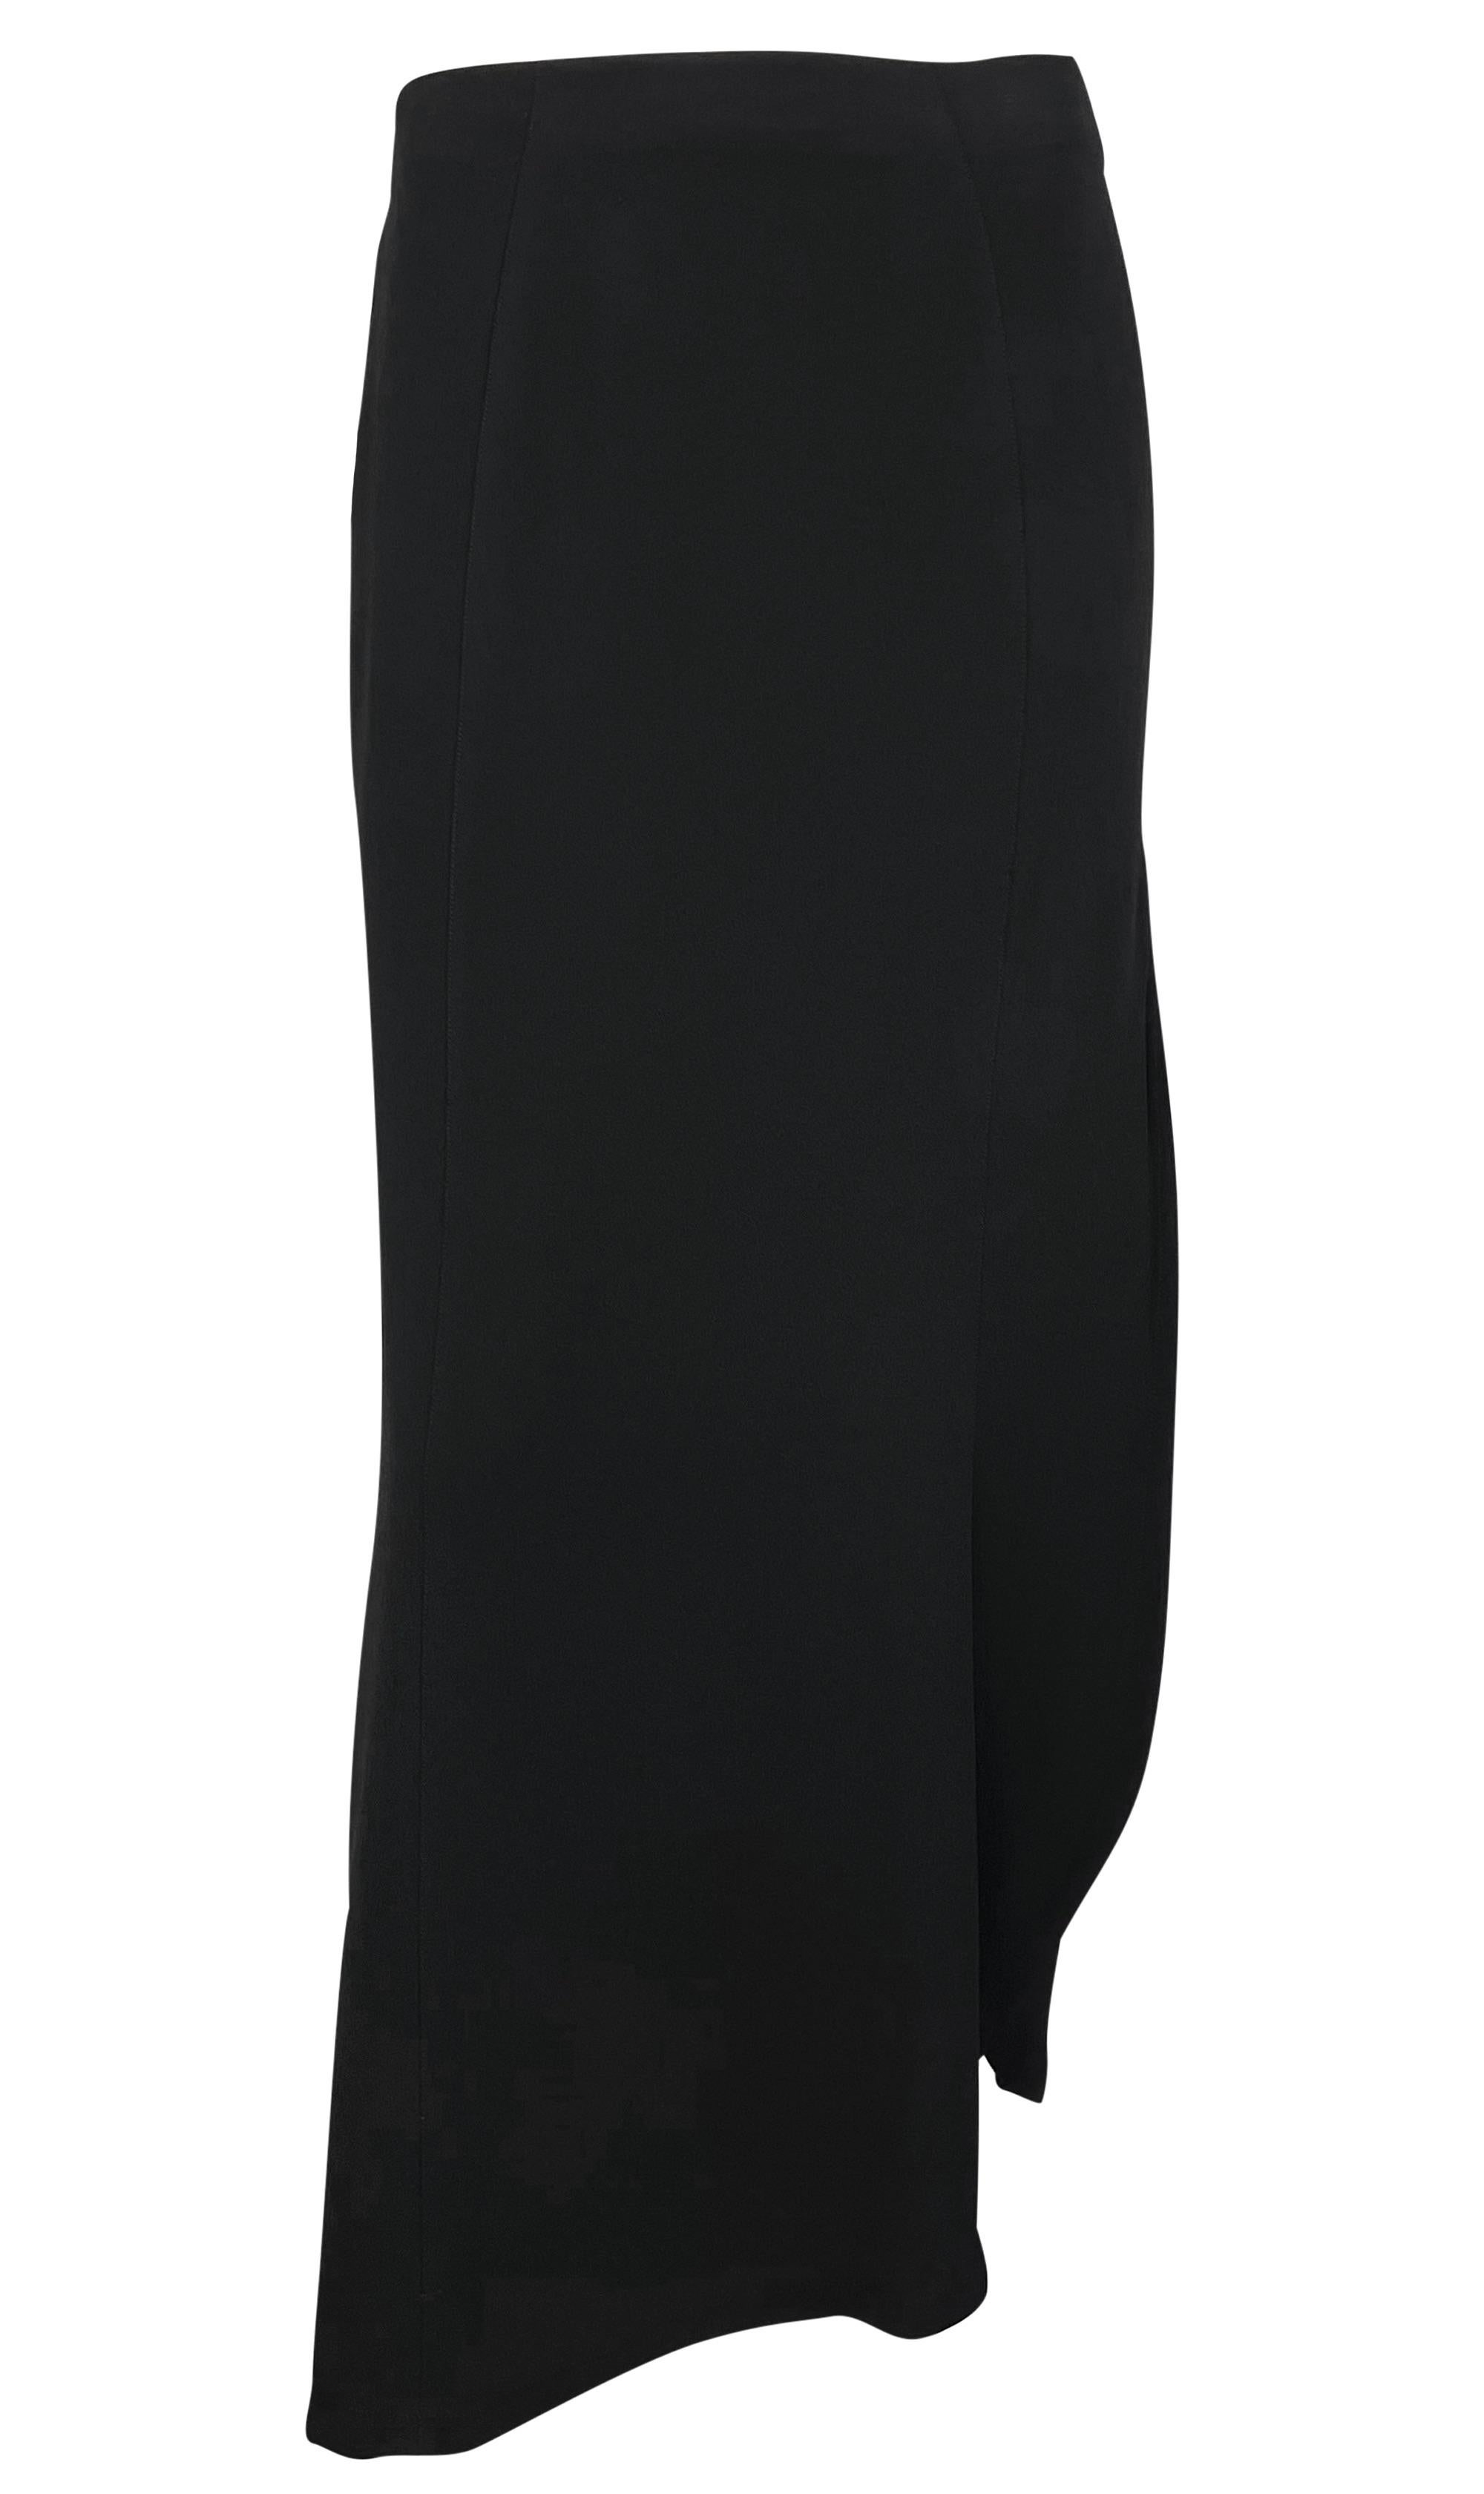 1990s Thierry Mugler Black Asymmetric High-Slit Midi Skirt In Excellent Condition For Sale In West Hollywood, CA